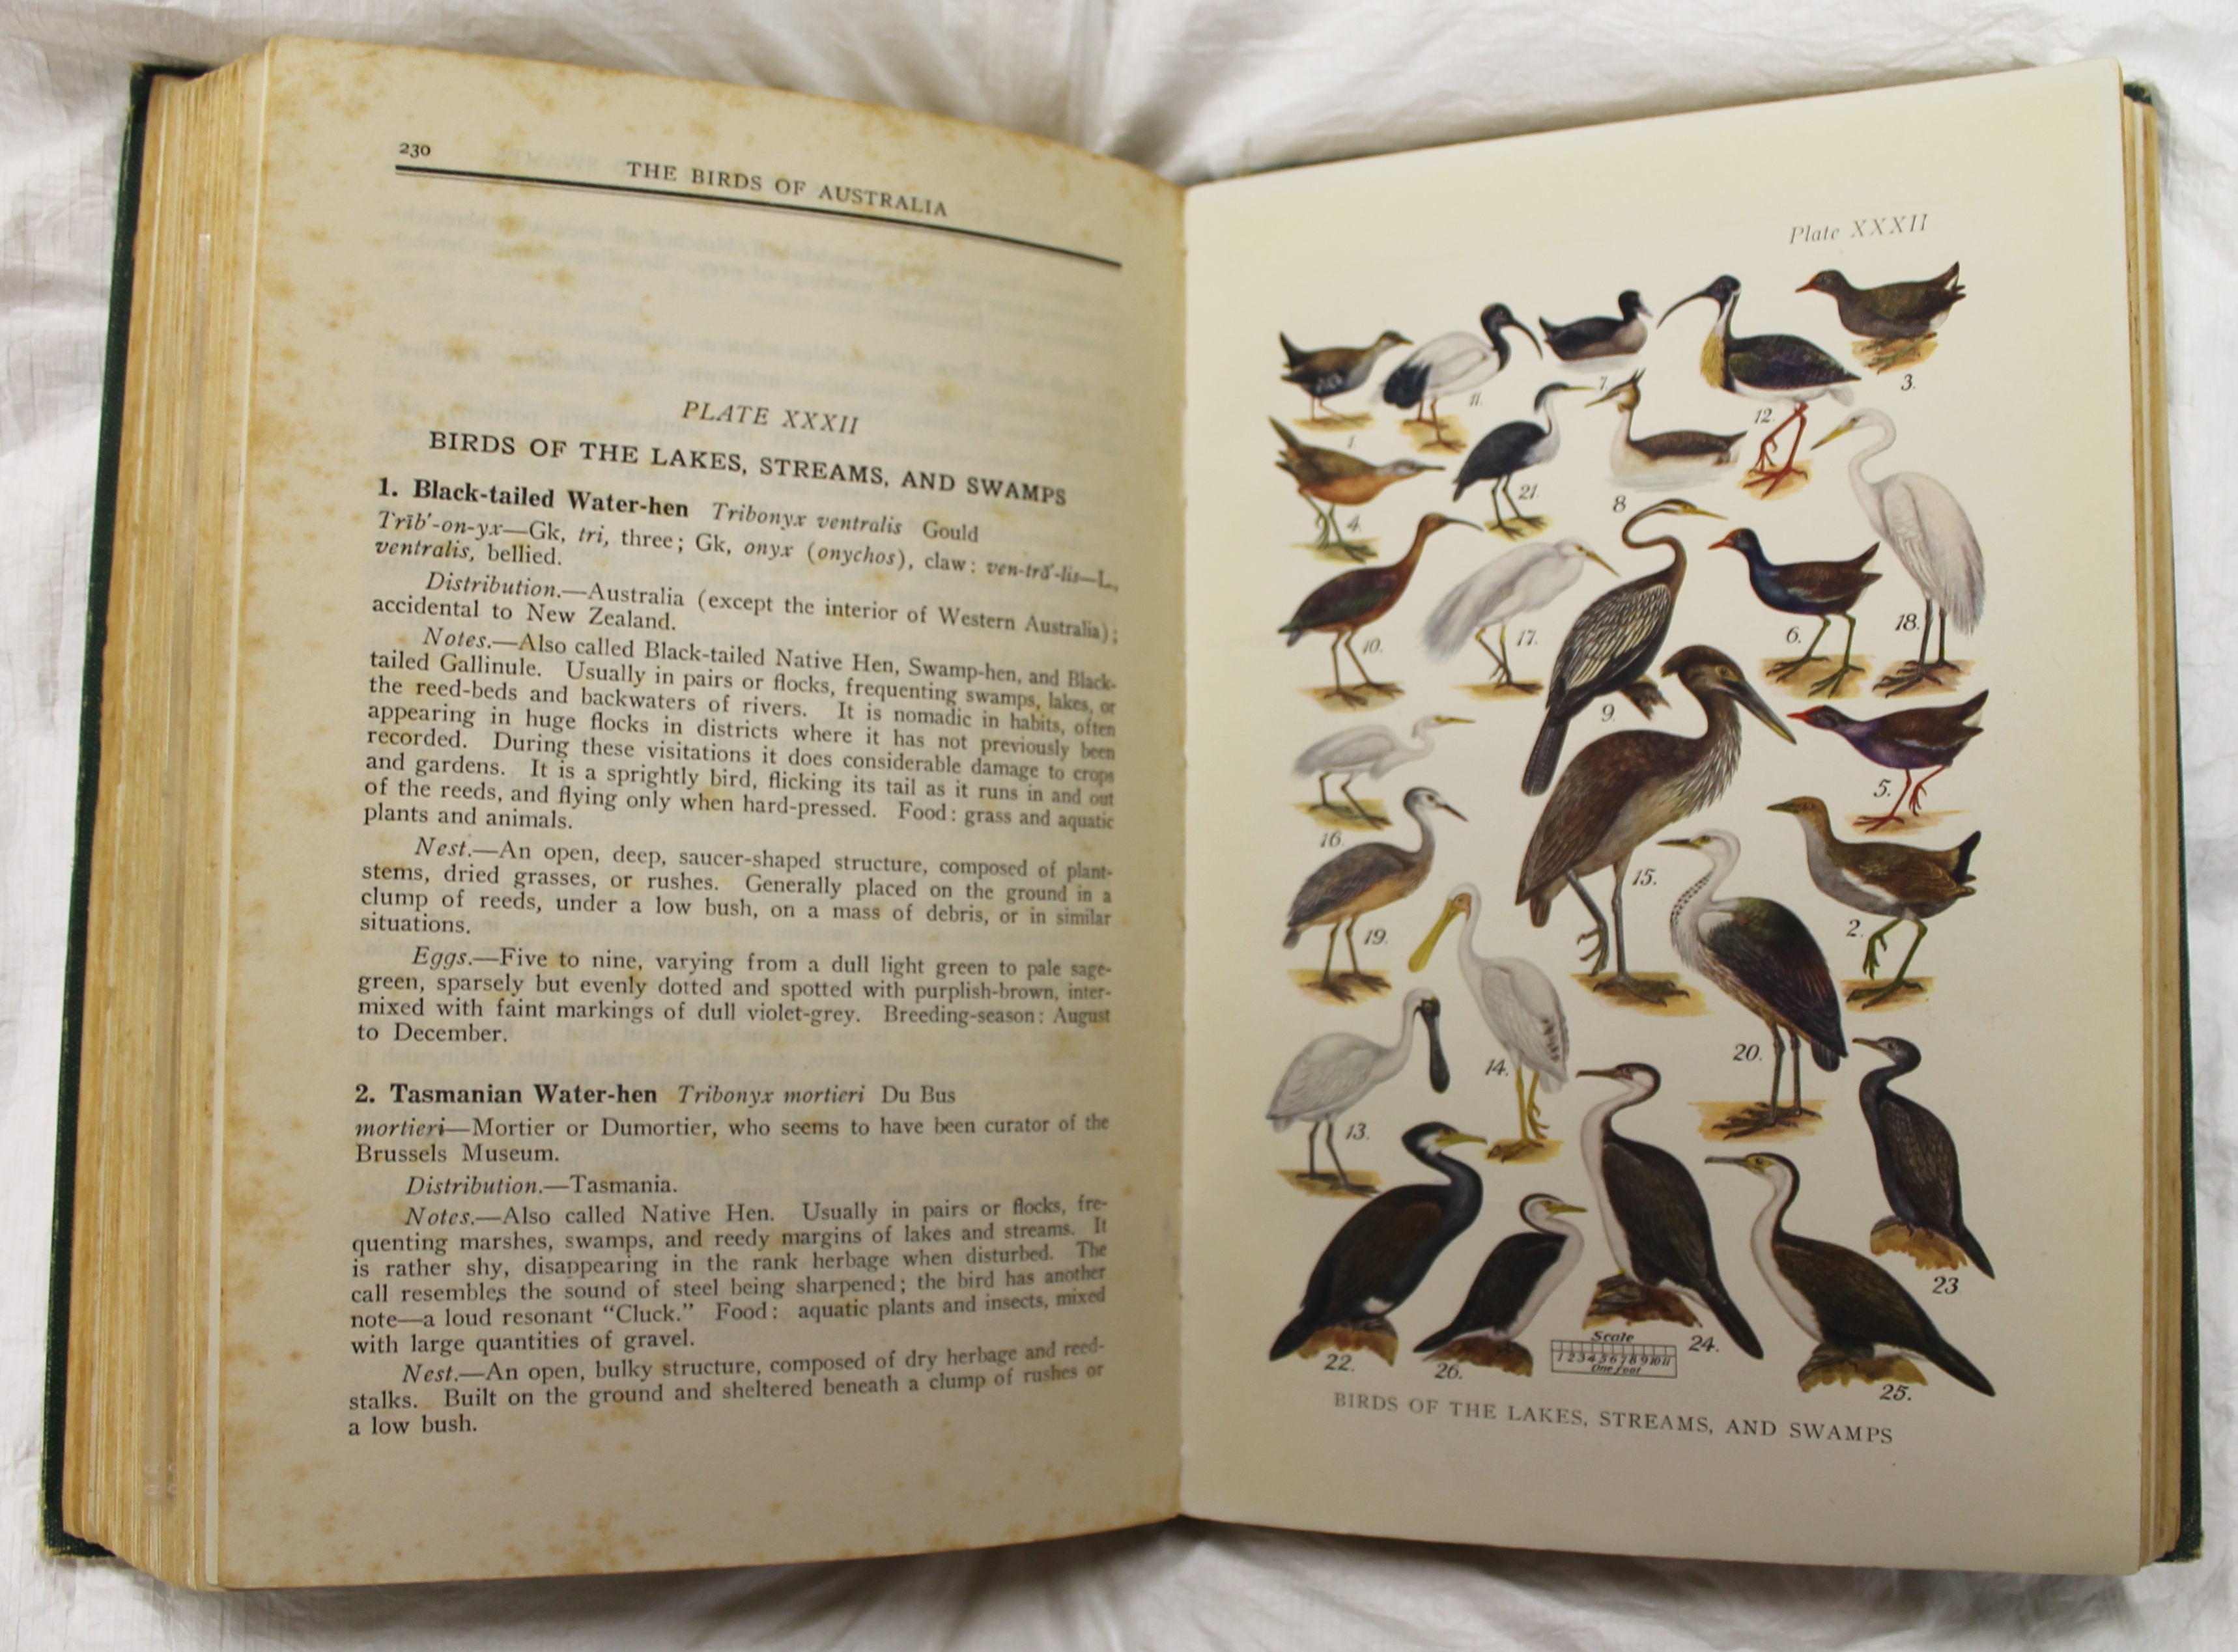 Plate XXXII, 'Birds of the lakes, streams and swamps', in Neville W Cayley, 'What bird is that?' (1931).